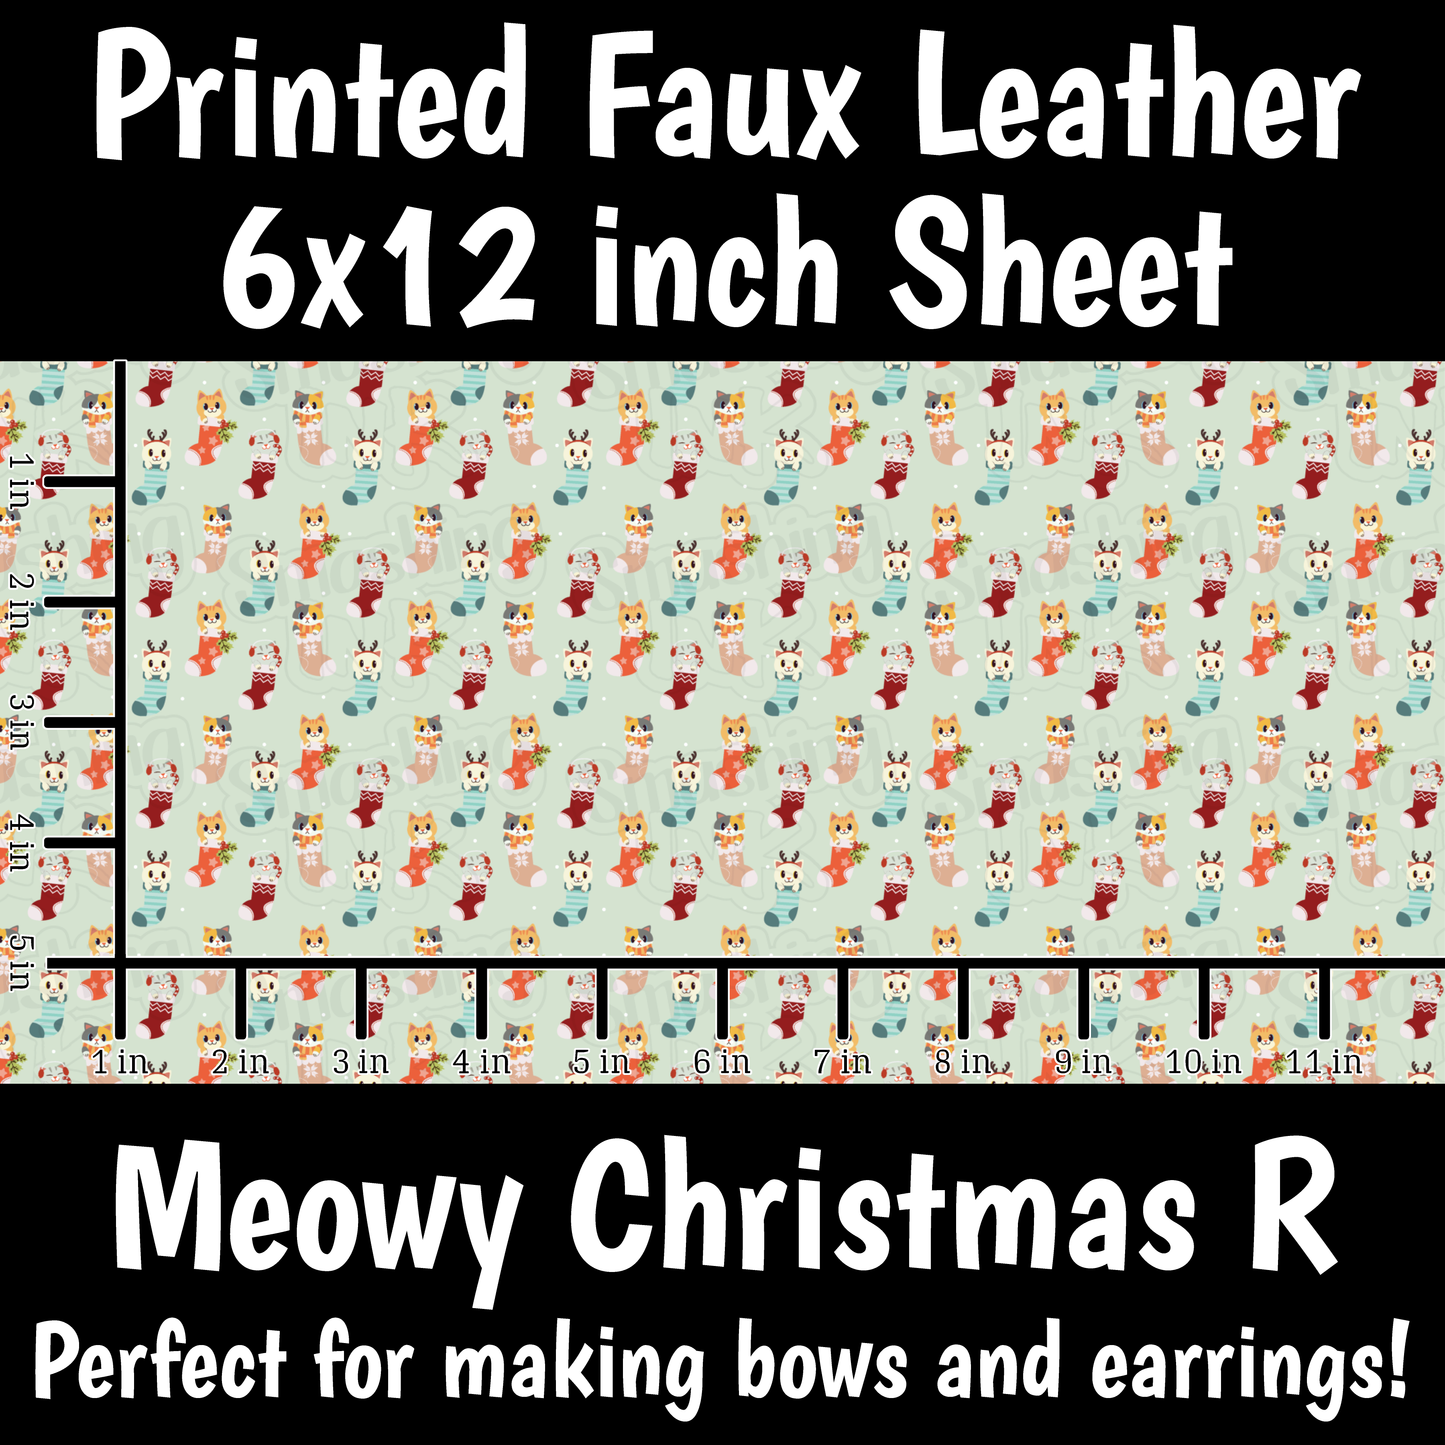 Meowy Christmas R - Faux Leather Sheet (SHIPS IN 3 BUS DAYS)